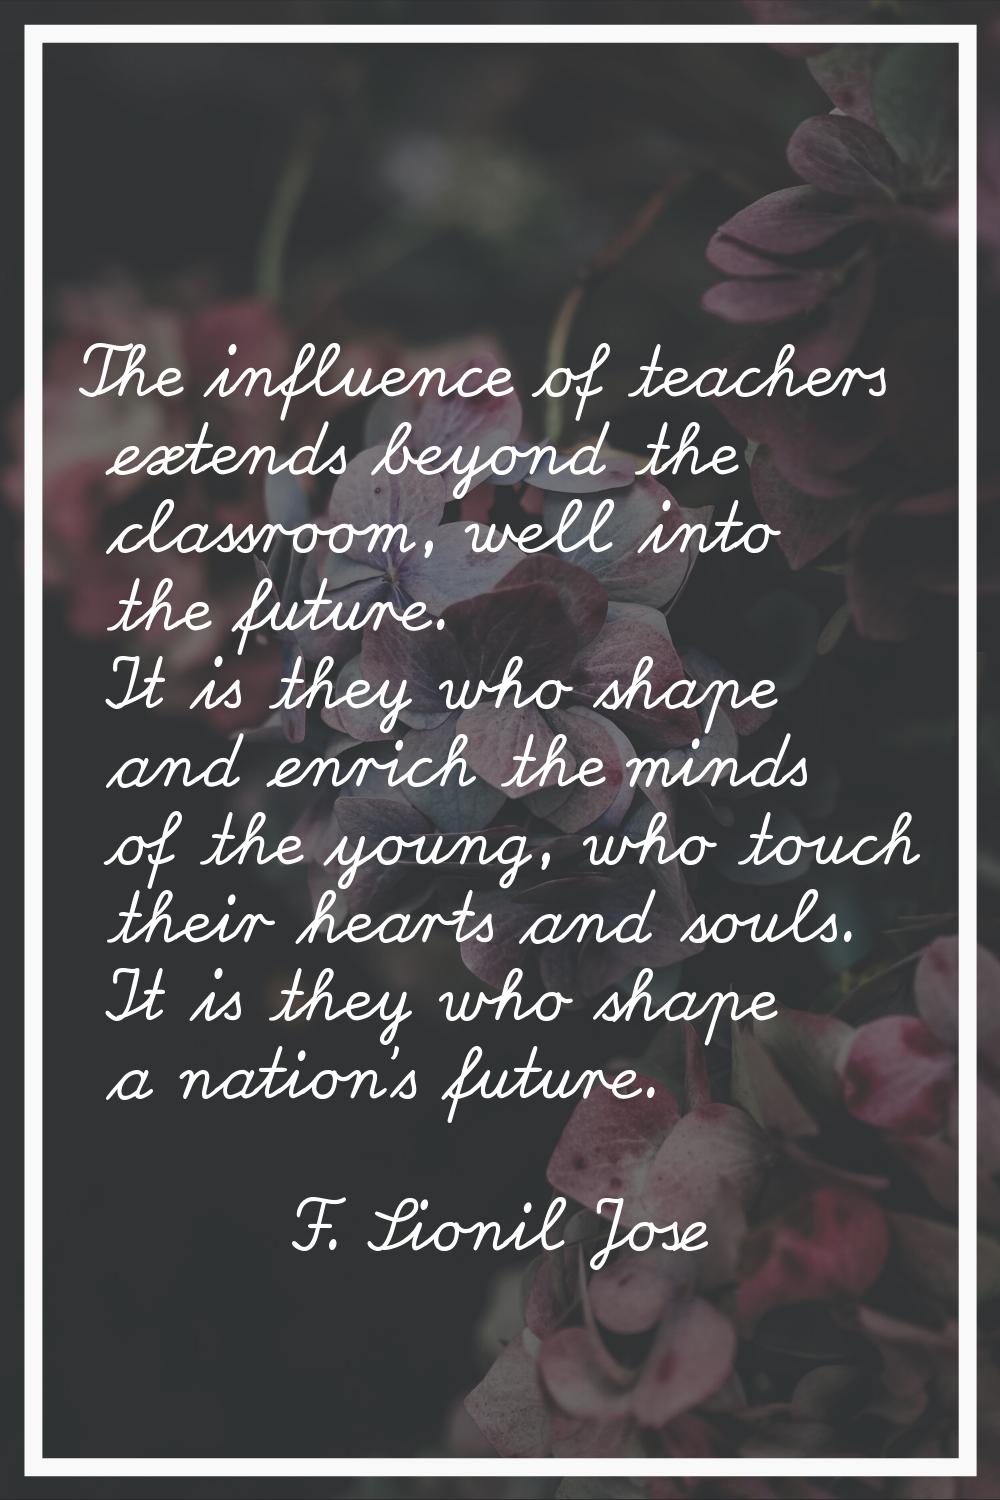 The influence of teachers extends beyond the classroom, well into the future. It is they who shape 